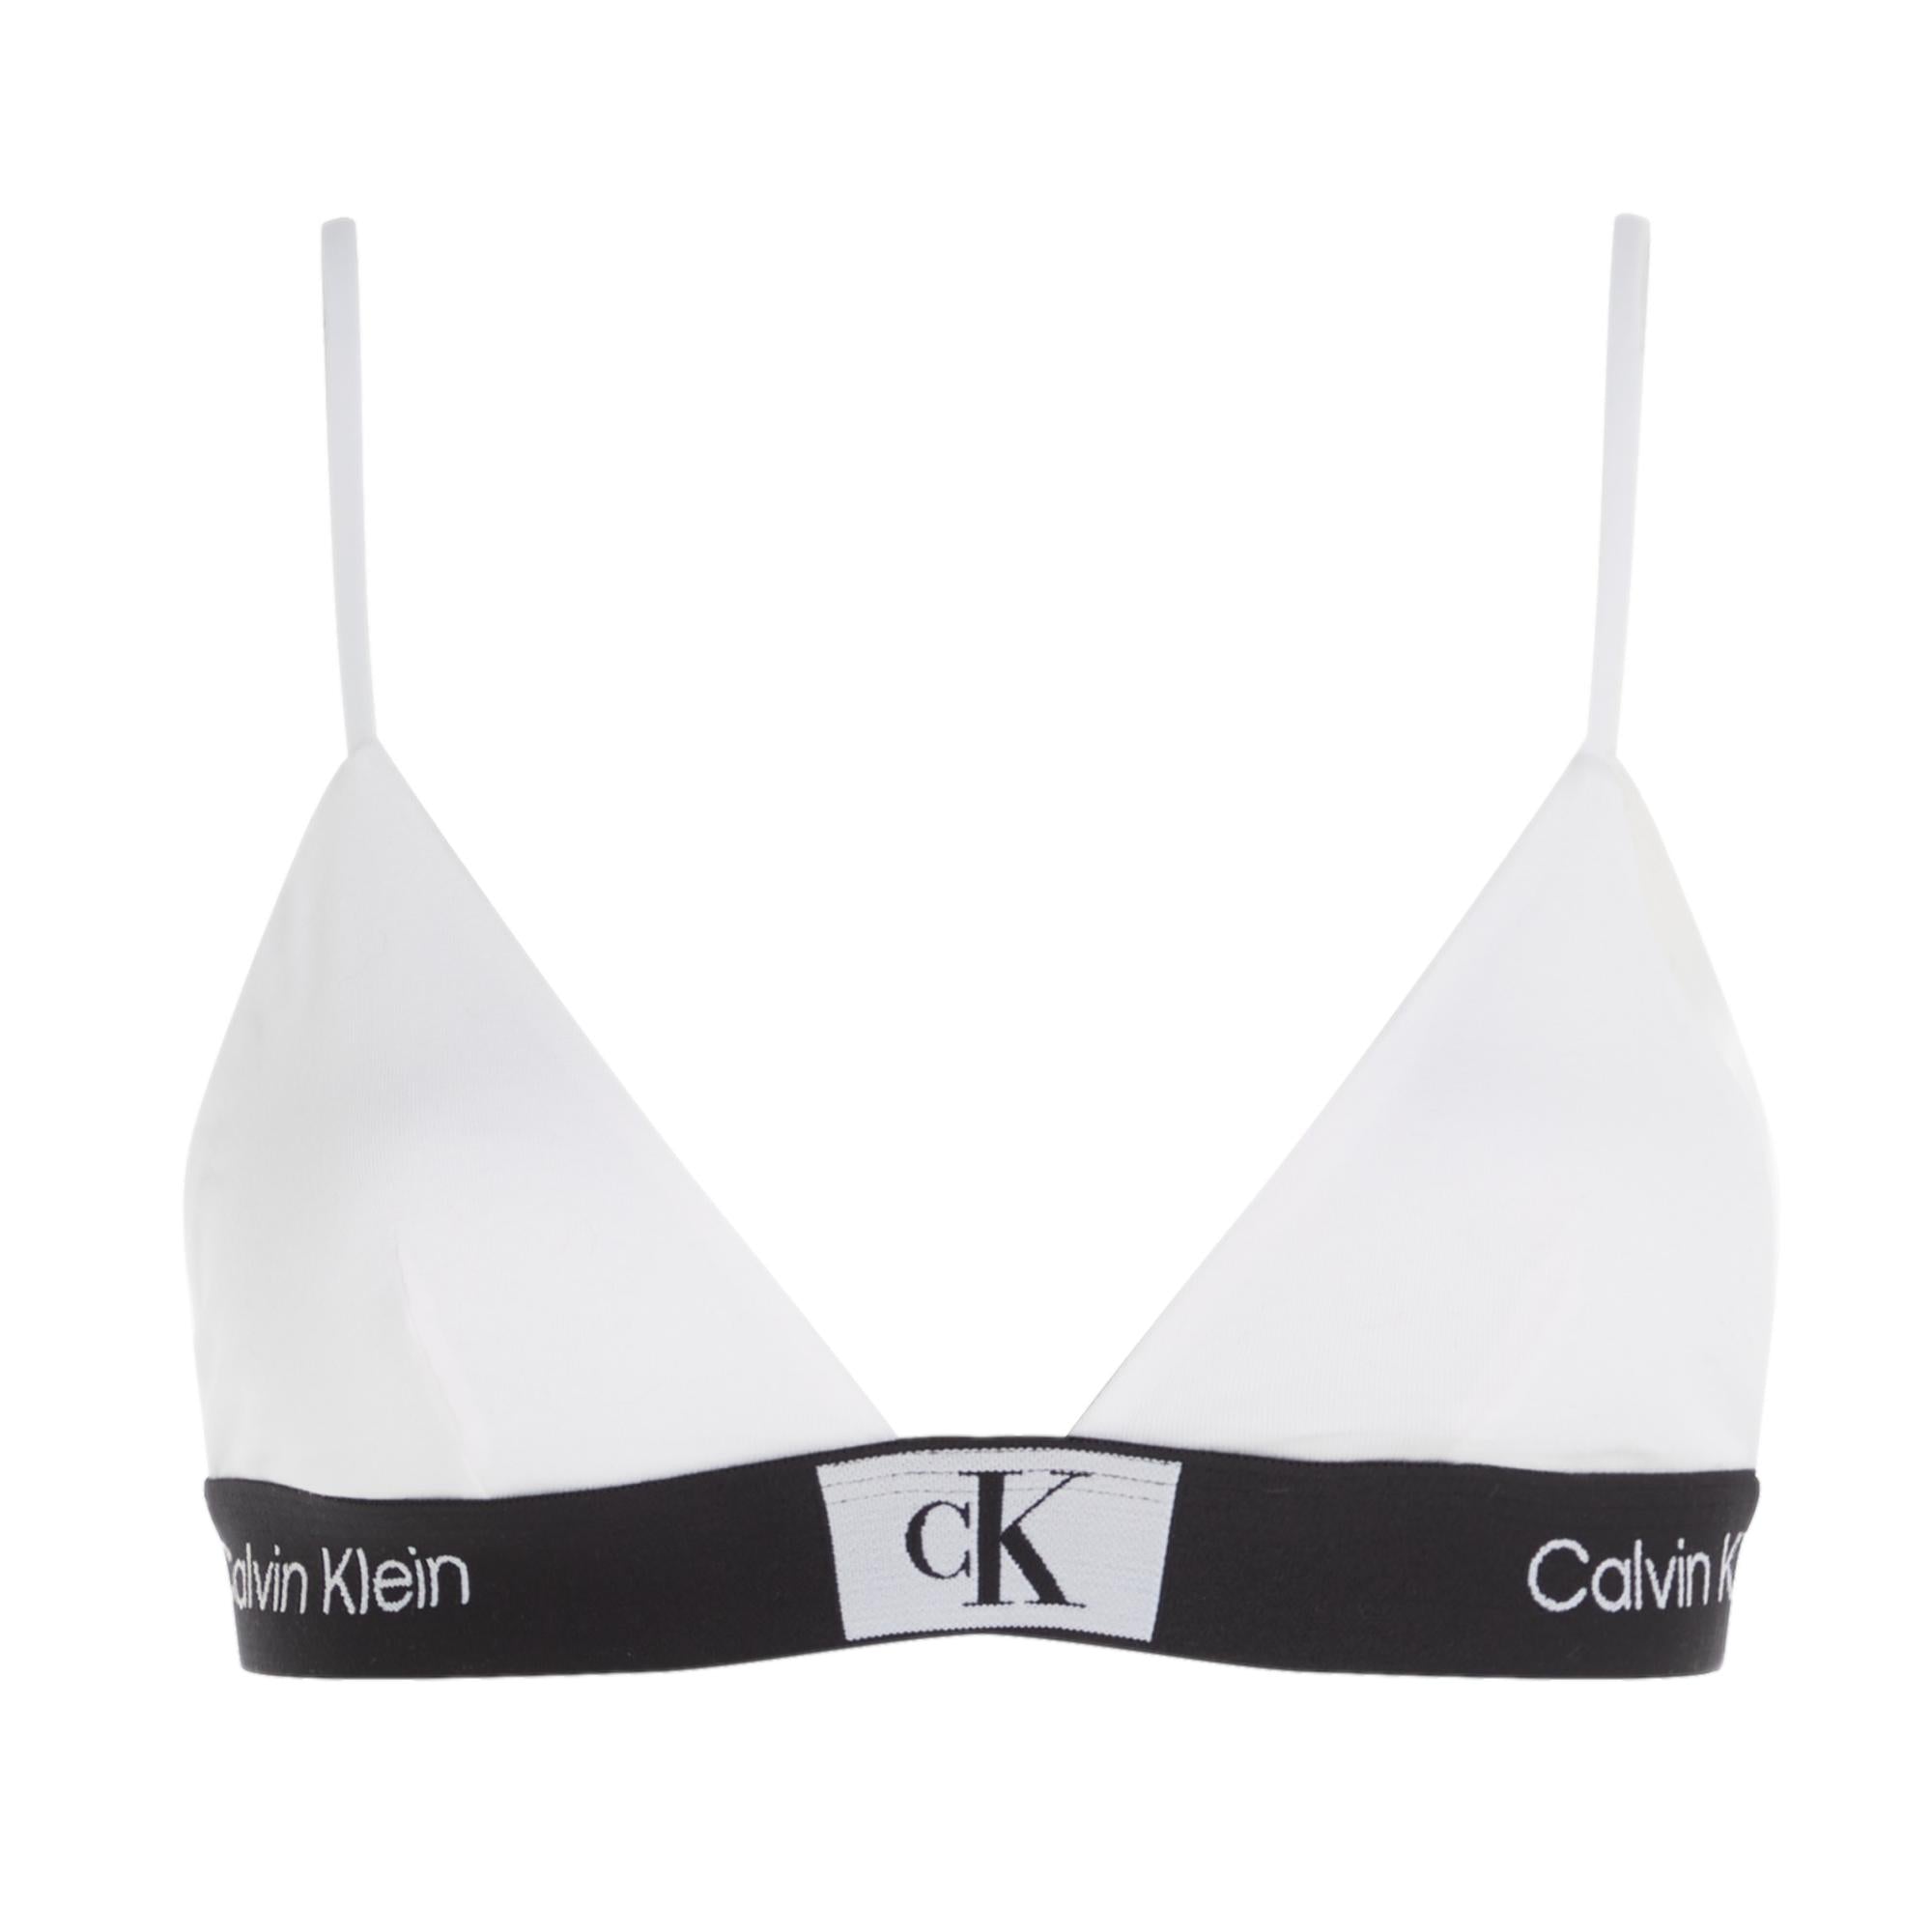 Calvin Klein - The Calvin Klein 1996 Unlined Triangle Bralette and Bikini.  Amplified classics. 90s-inspired design. Shop now